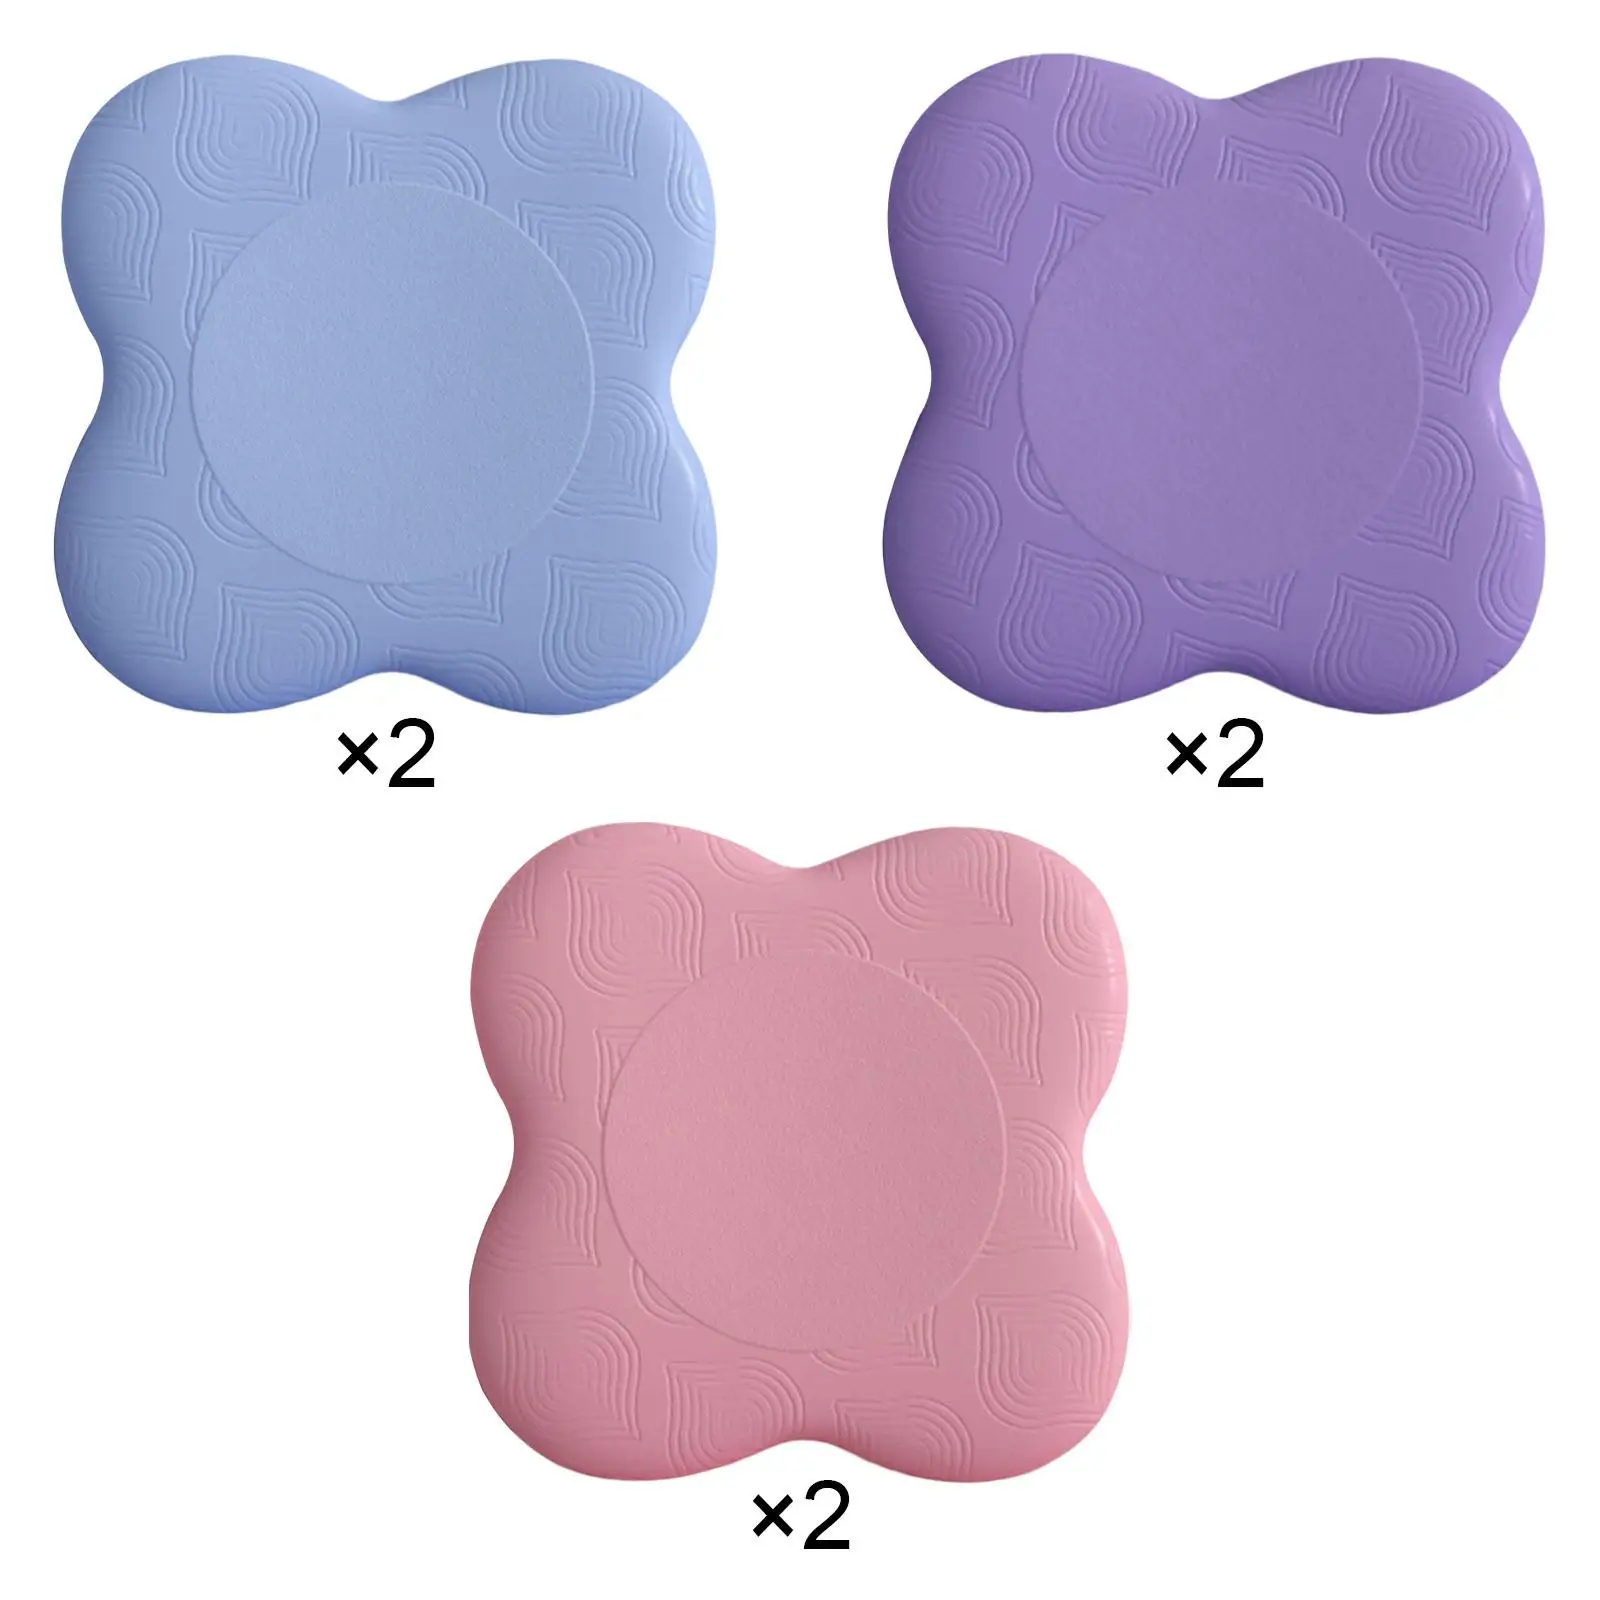 2Pcs Yoga Knee Pads Exercise Knee Pad Balance Cushion for Elbow Ankle Travel